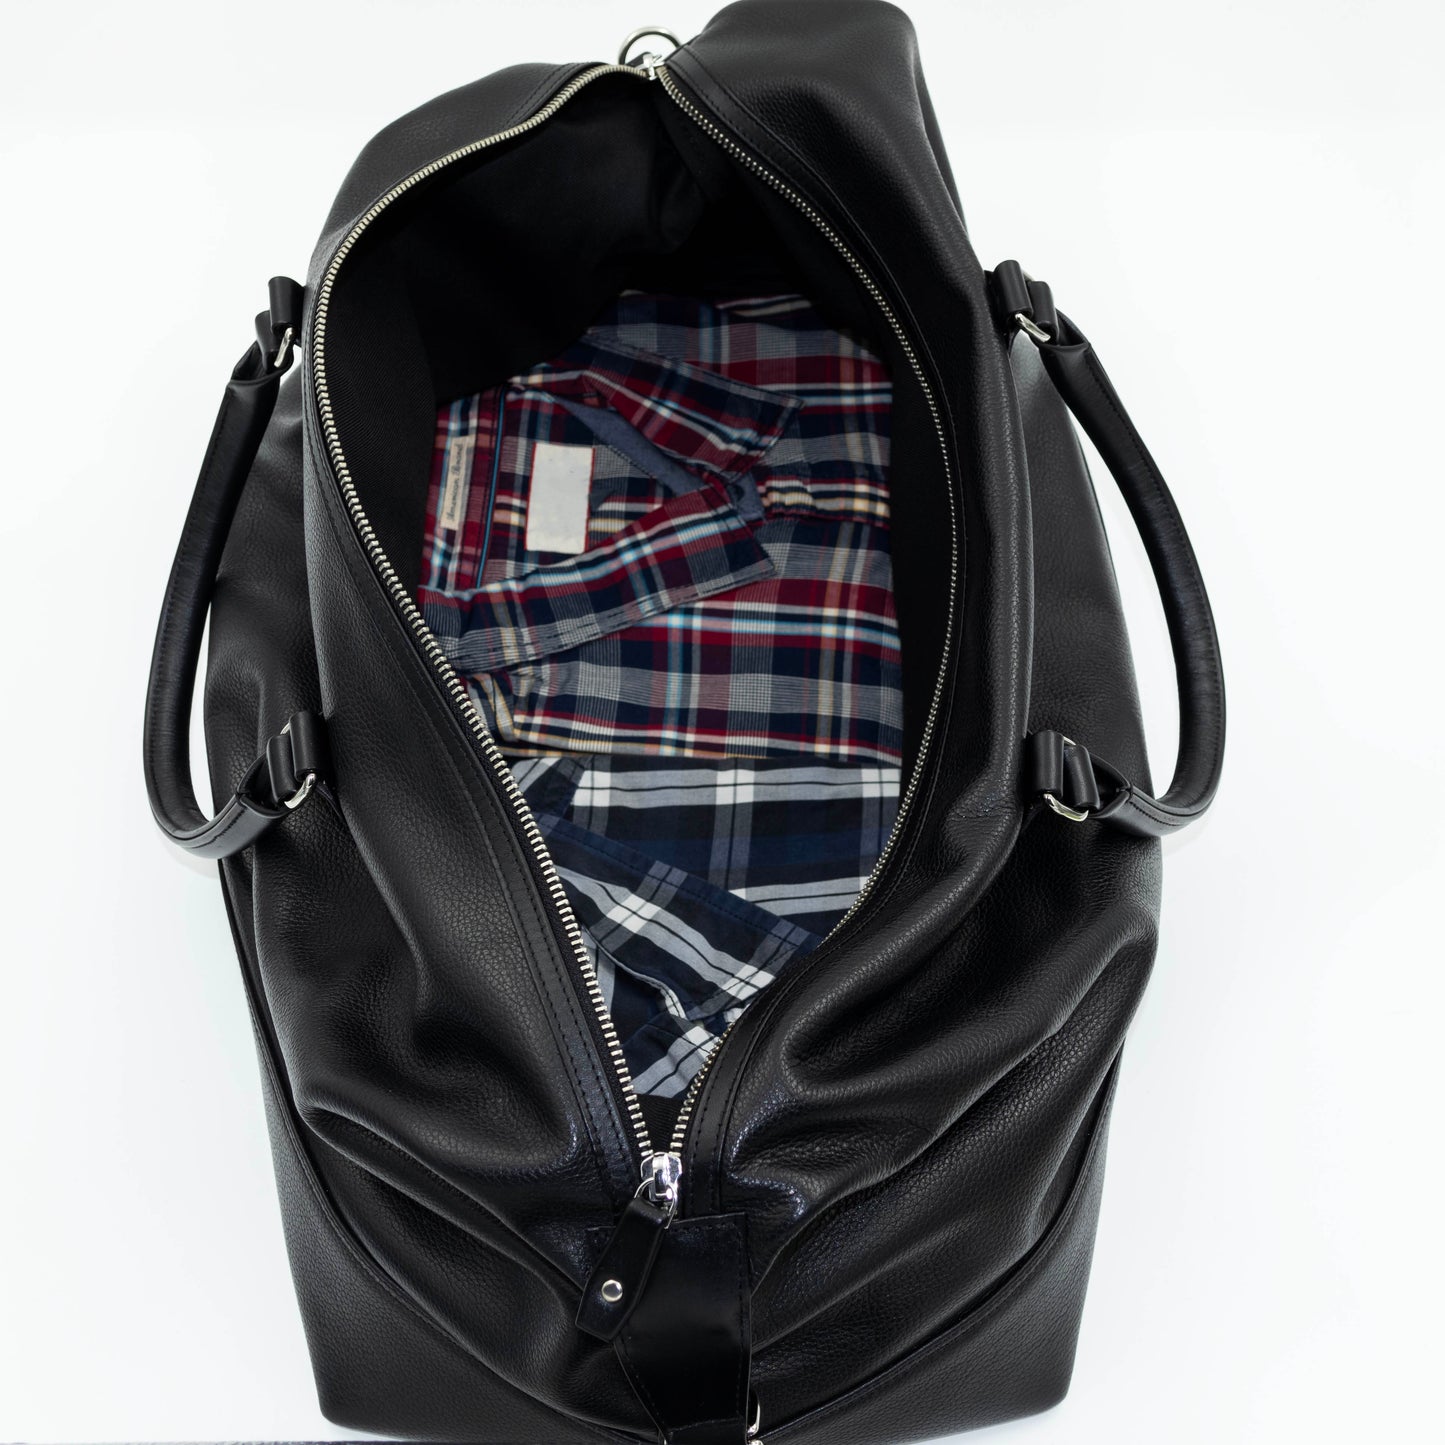 With a 30 litre capacity, the duffle bags unzips to reveal a spacious interior